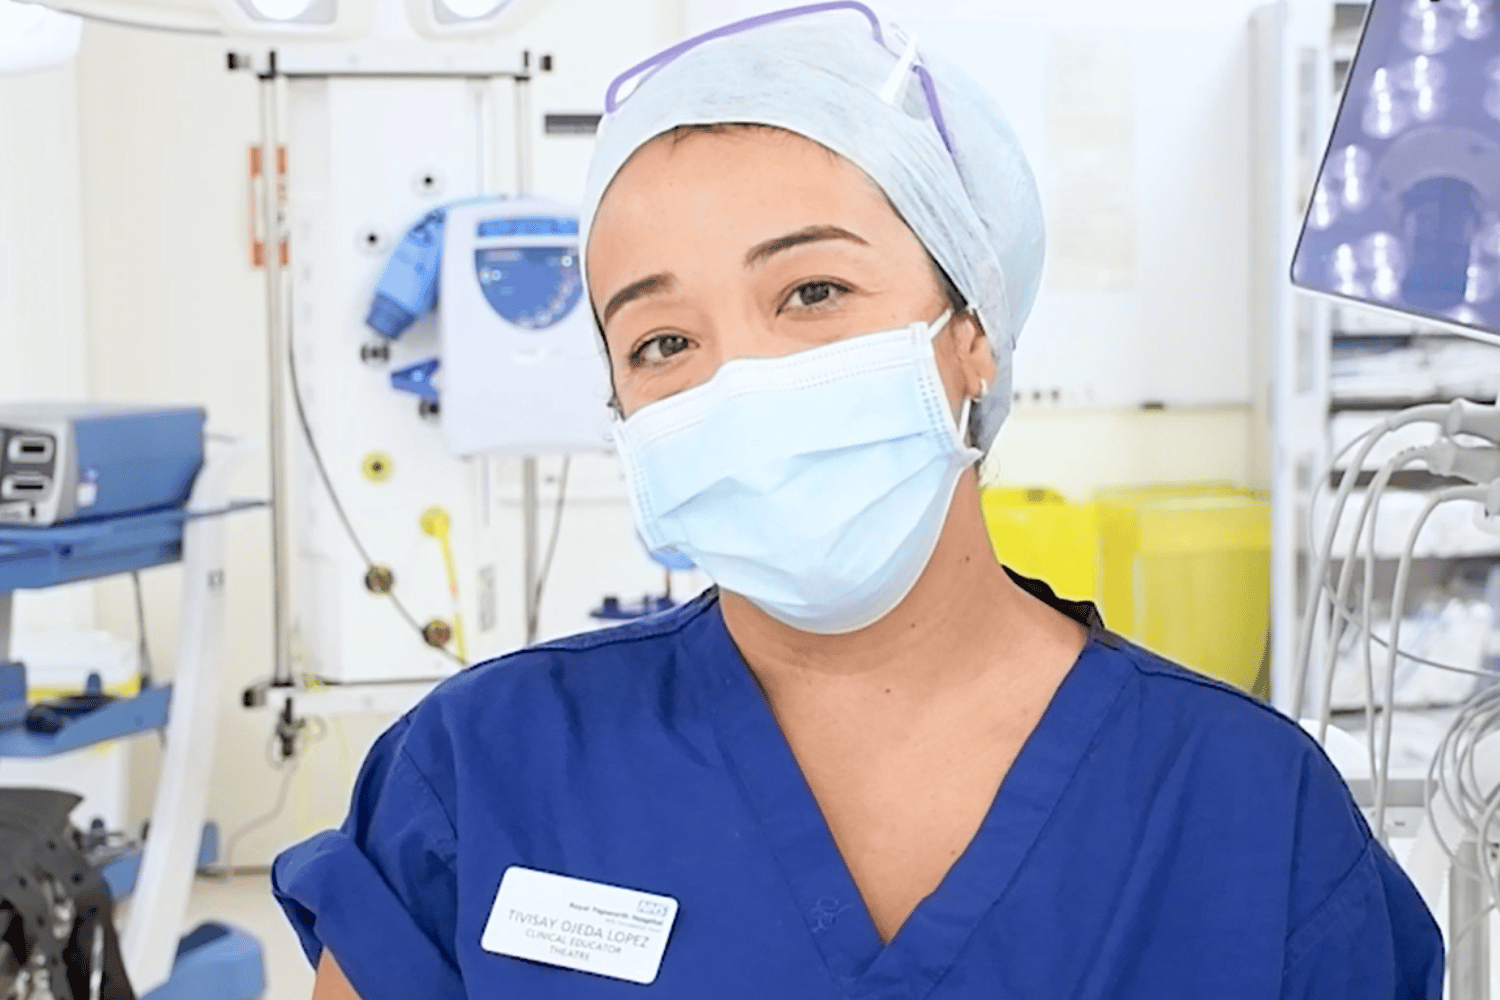 Tivisay in blue scrubs and wearing a face mask, with operating theatre equipment behind. 